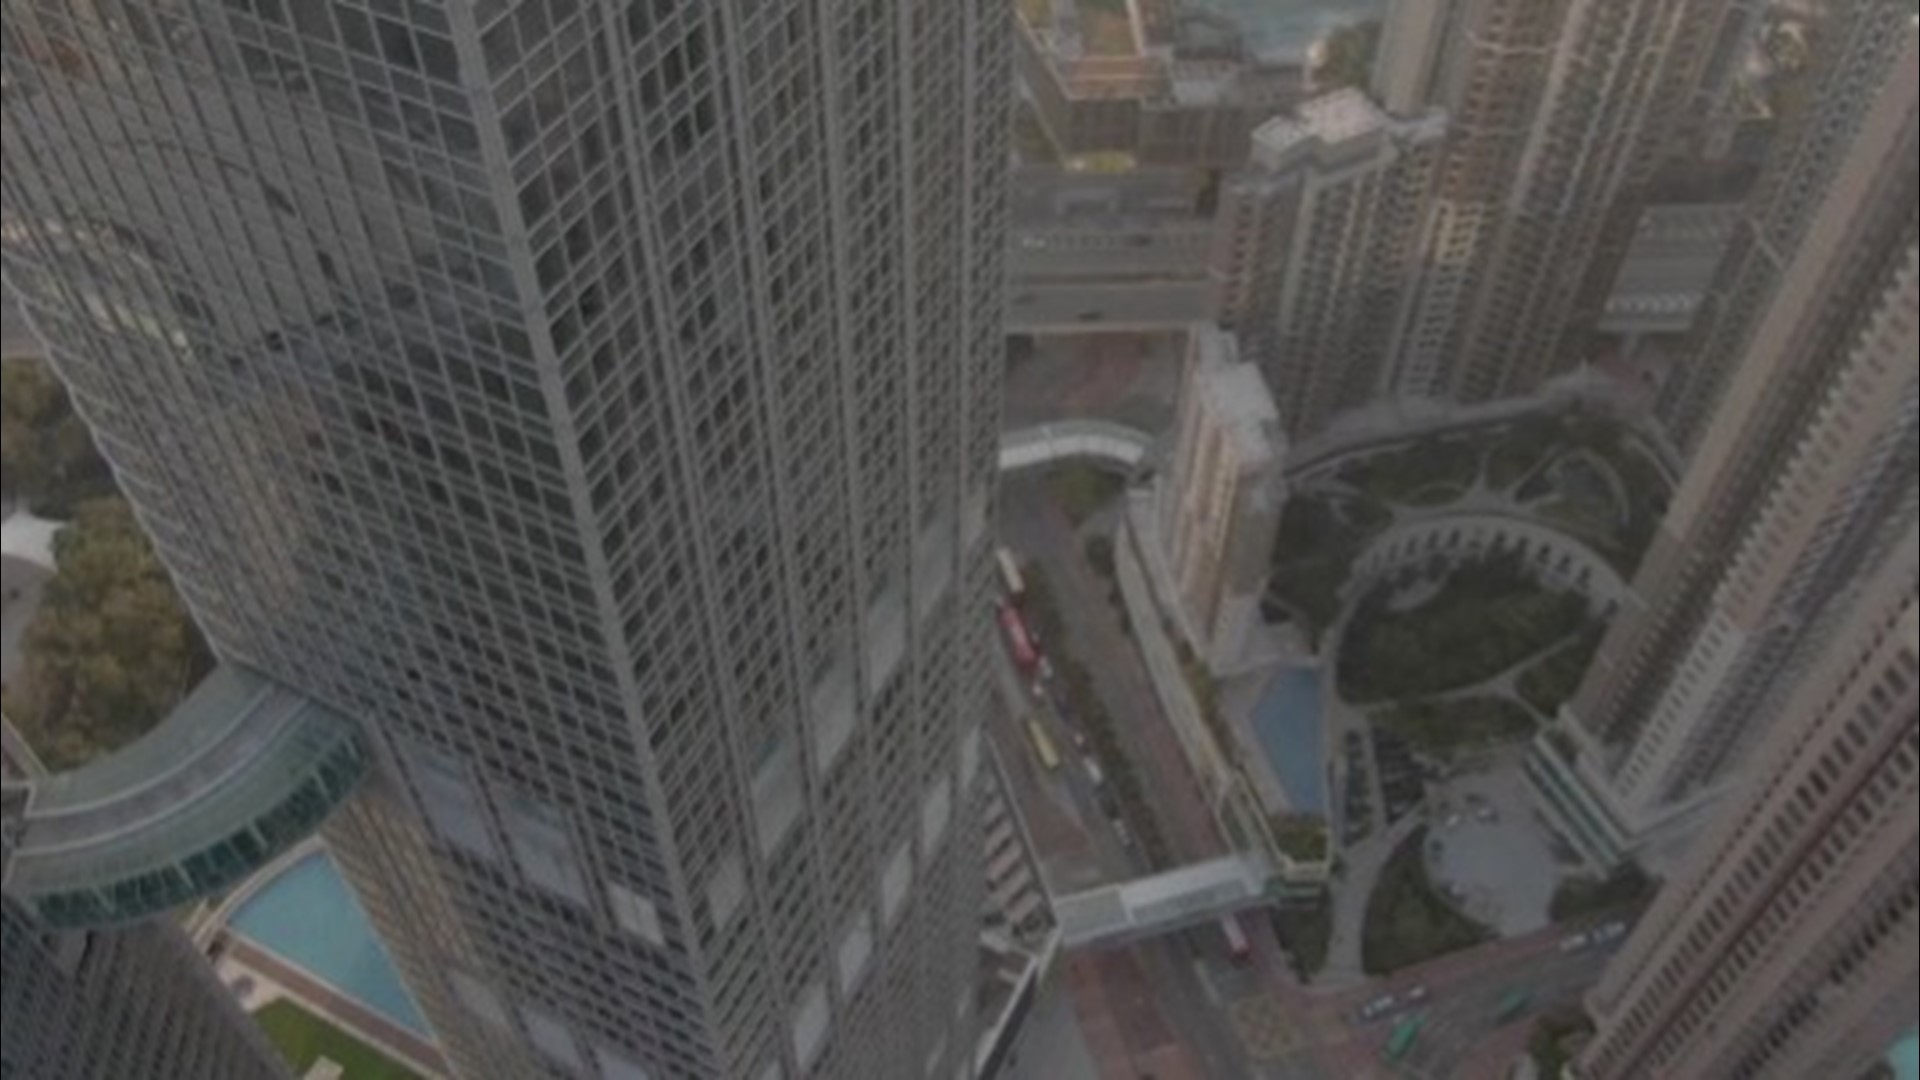 No, this isn't drone footage from the latest Mission Impossible film but it shows a paraplegic climber attempting to scale a skyscraper in Hong Kong. Buzz60's Mercer Morrison has the story.